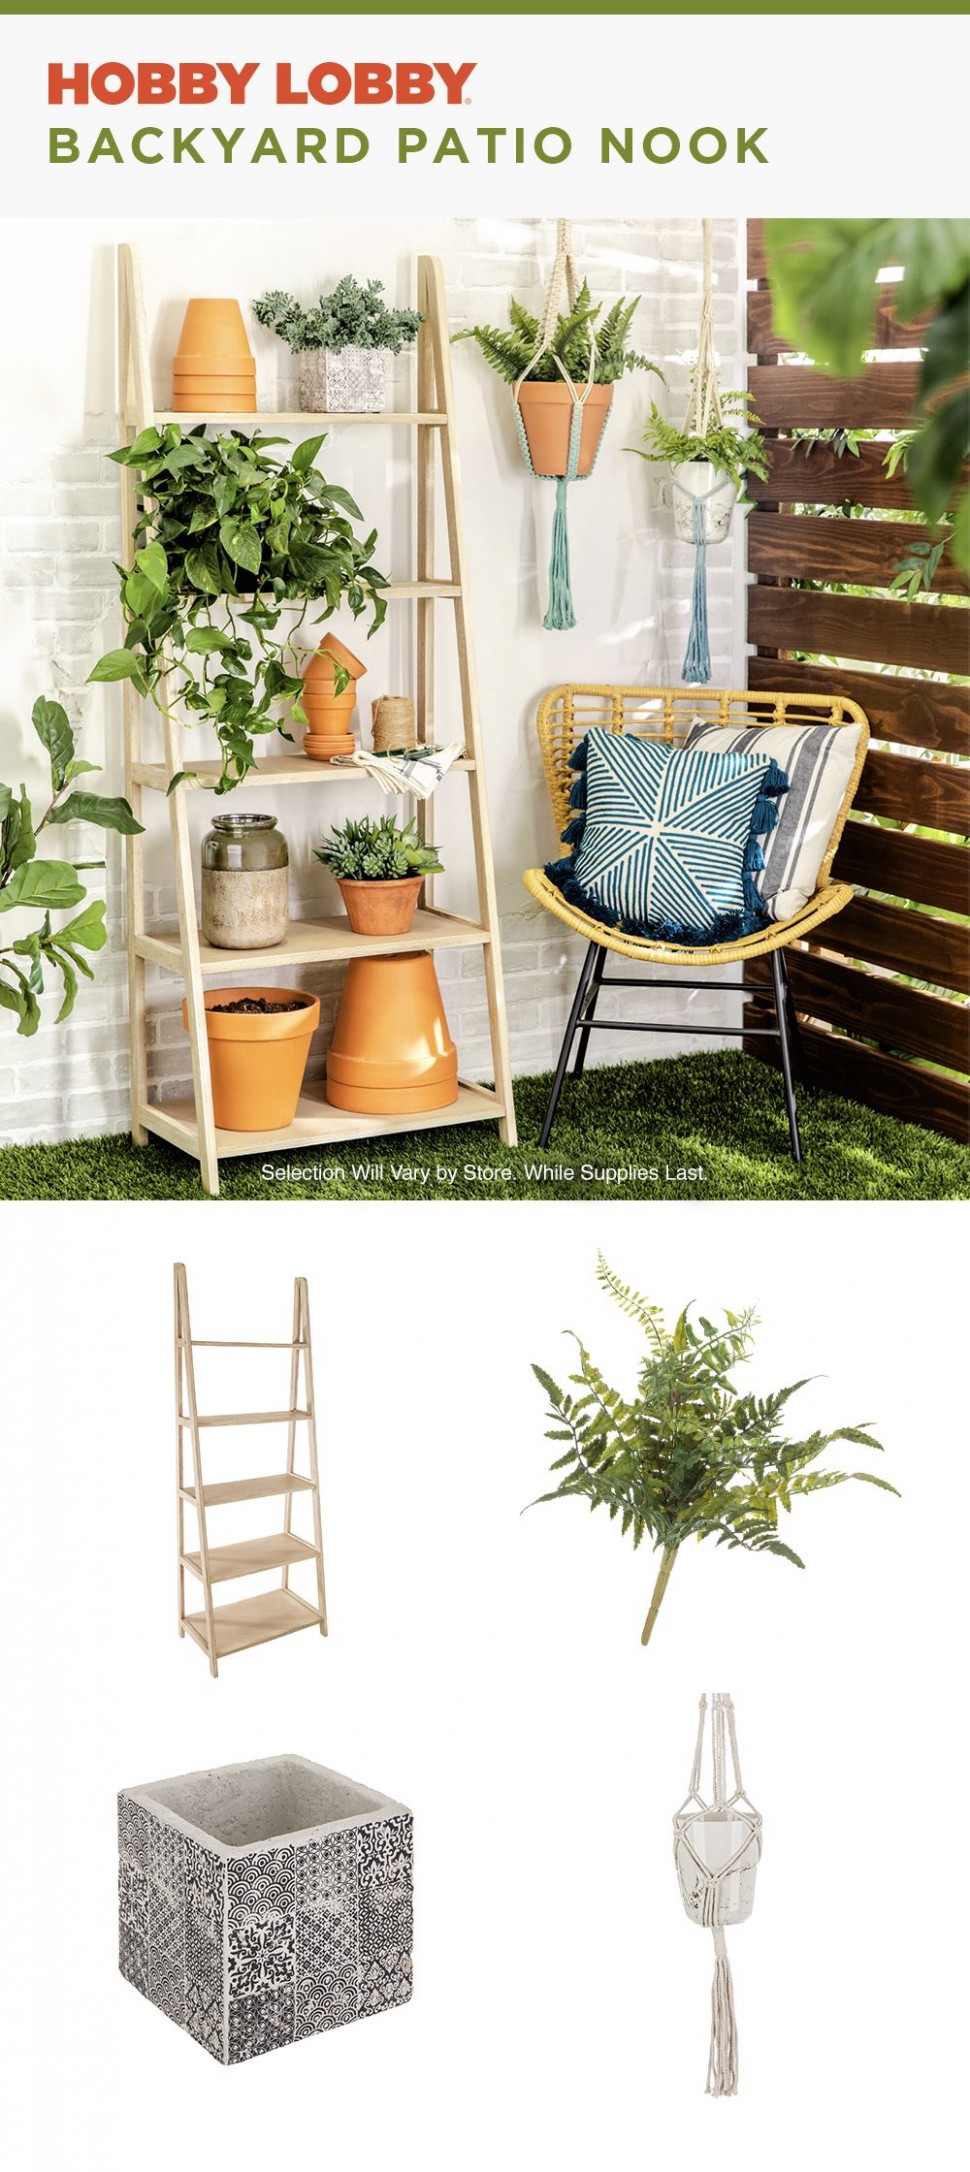 Create This Backyard Patio Nook With Supplies From Your Local ..